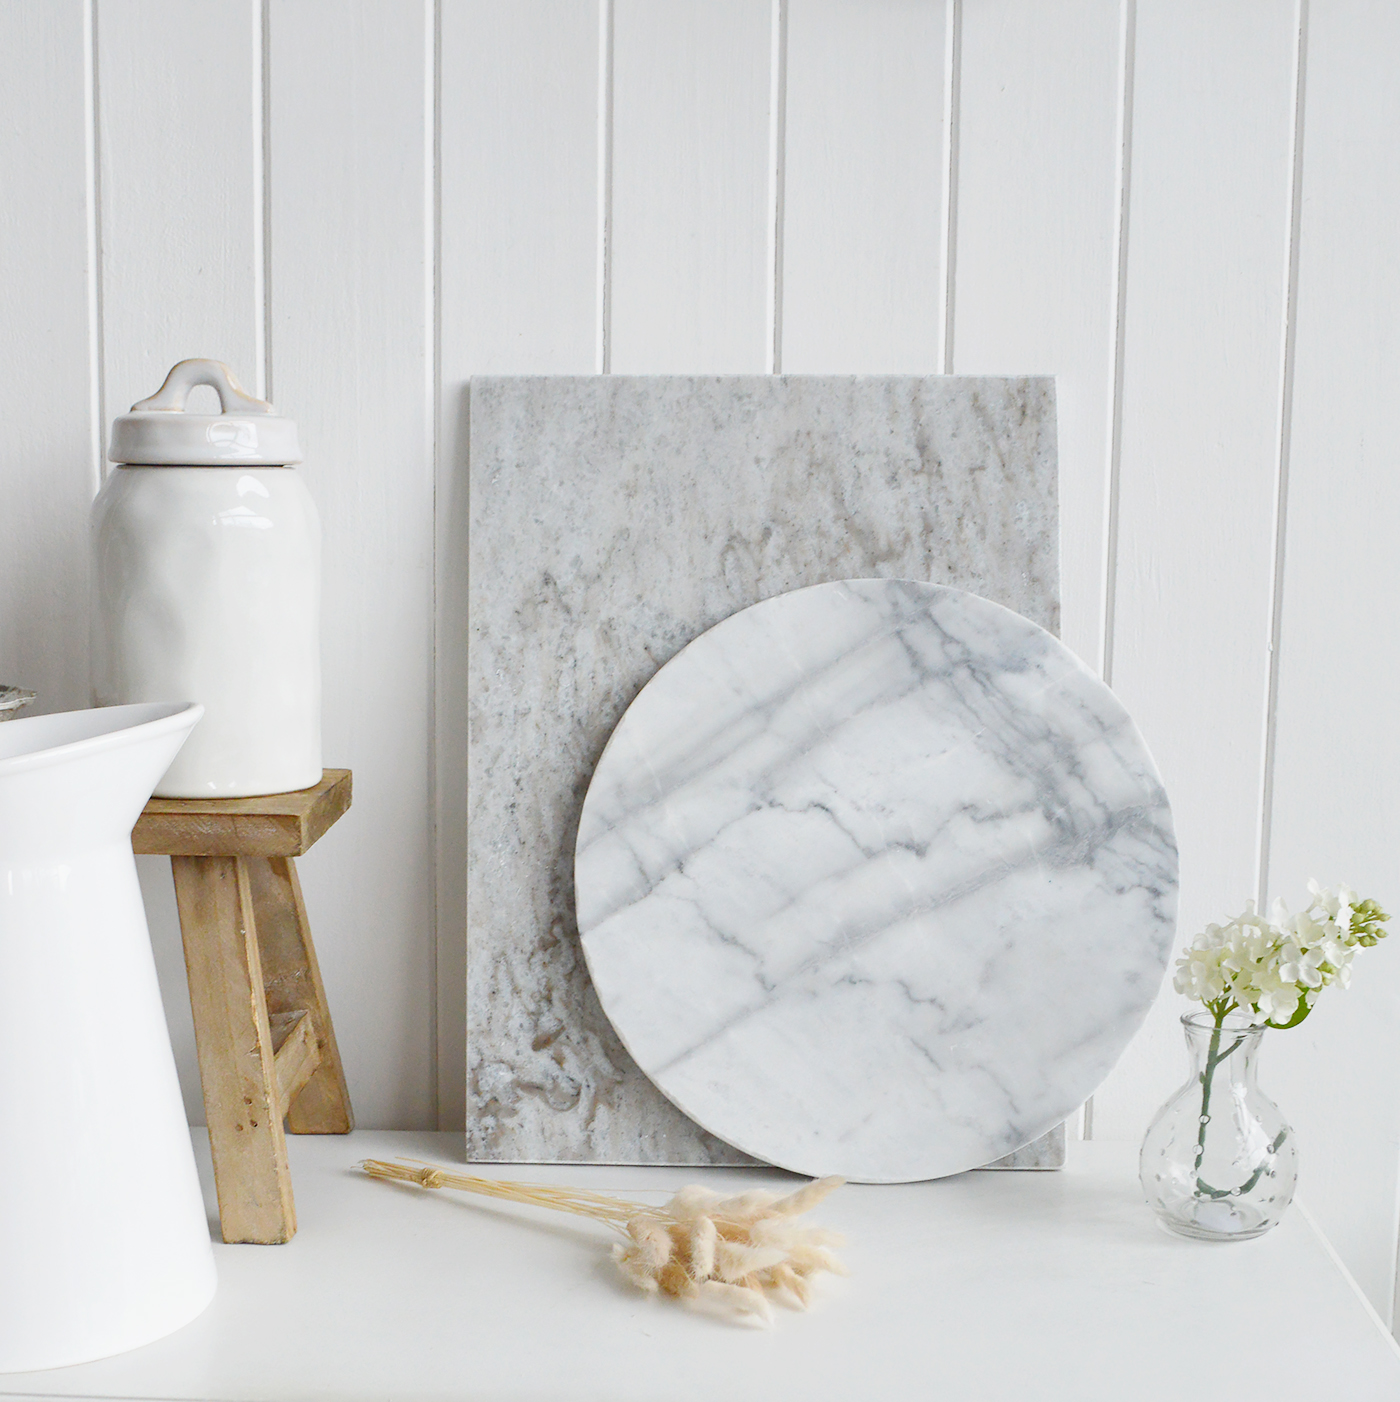 Grey & White marble Round Tray Chopping Boards - New England style White Home Accessories for country, coastal and city homes and interiors